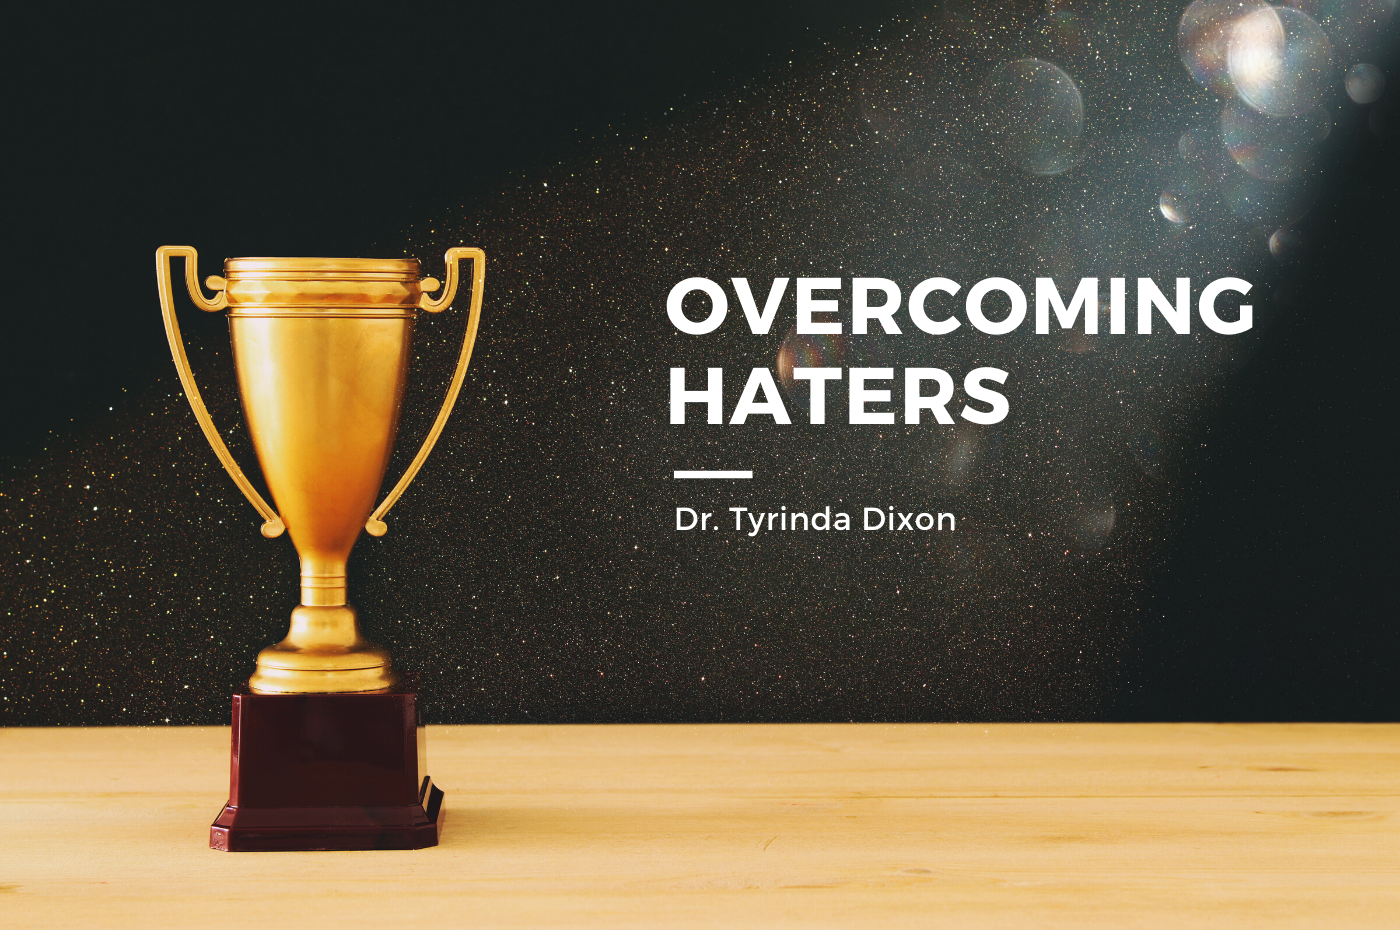 Overcoming Haters